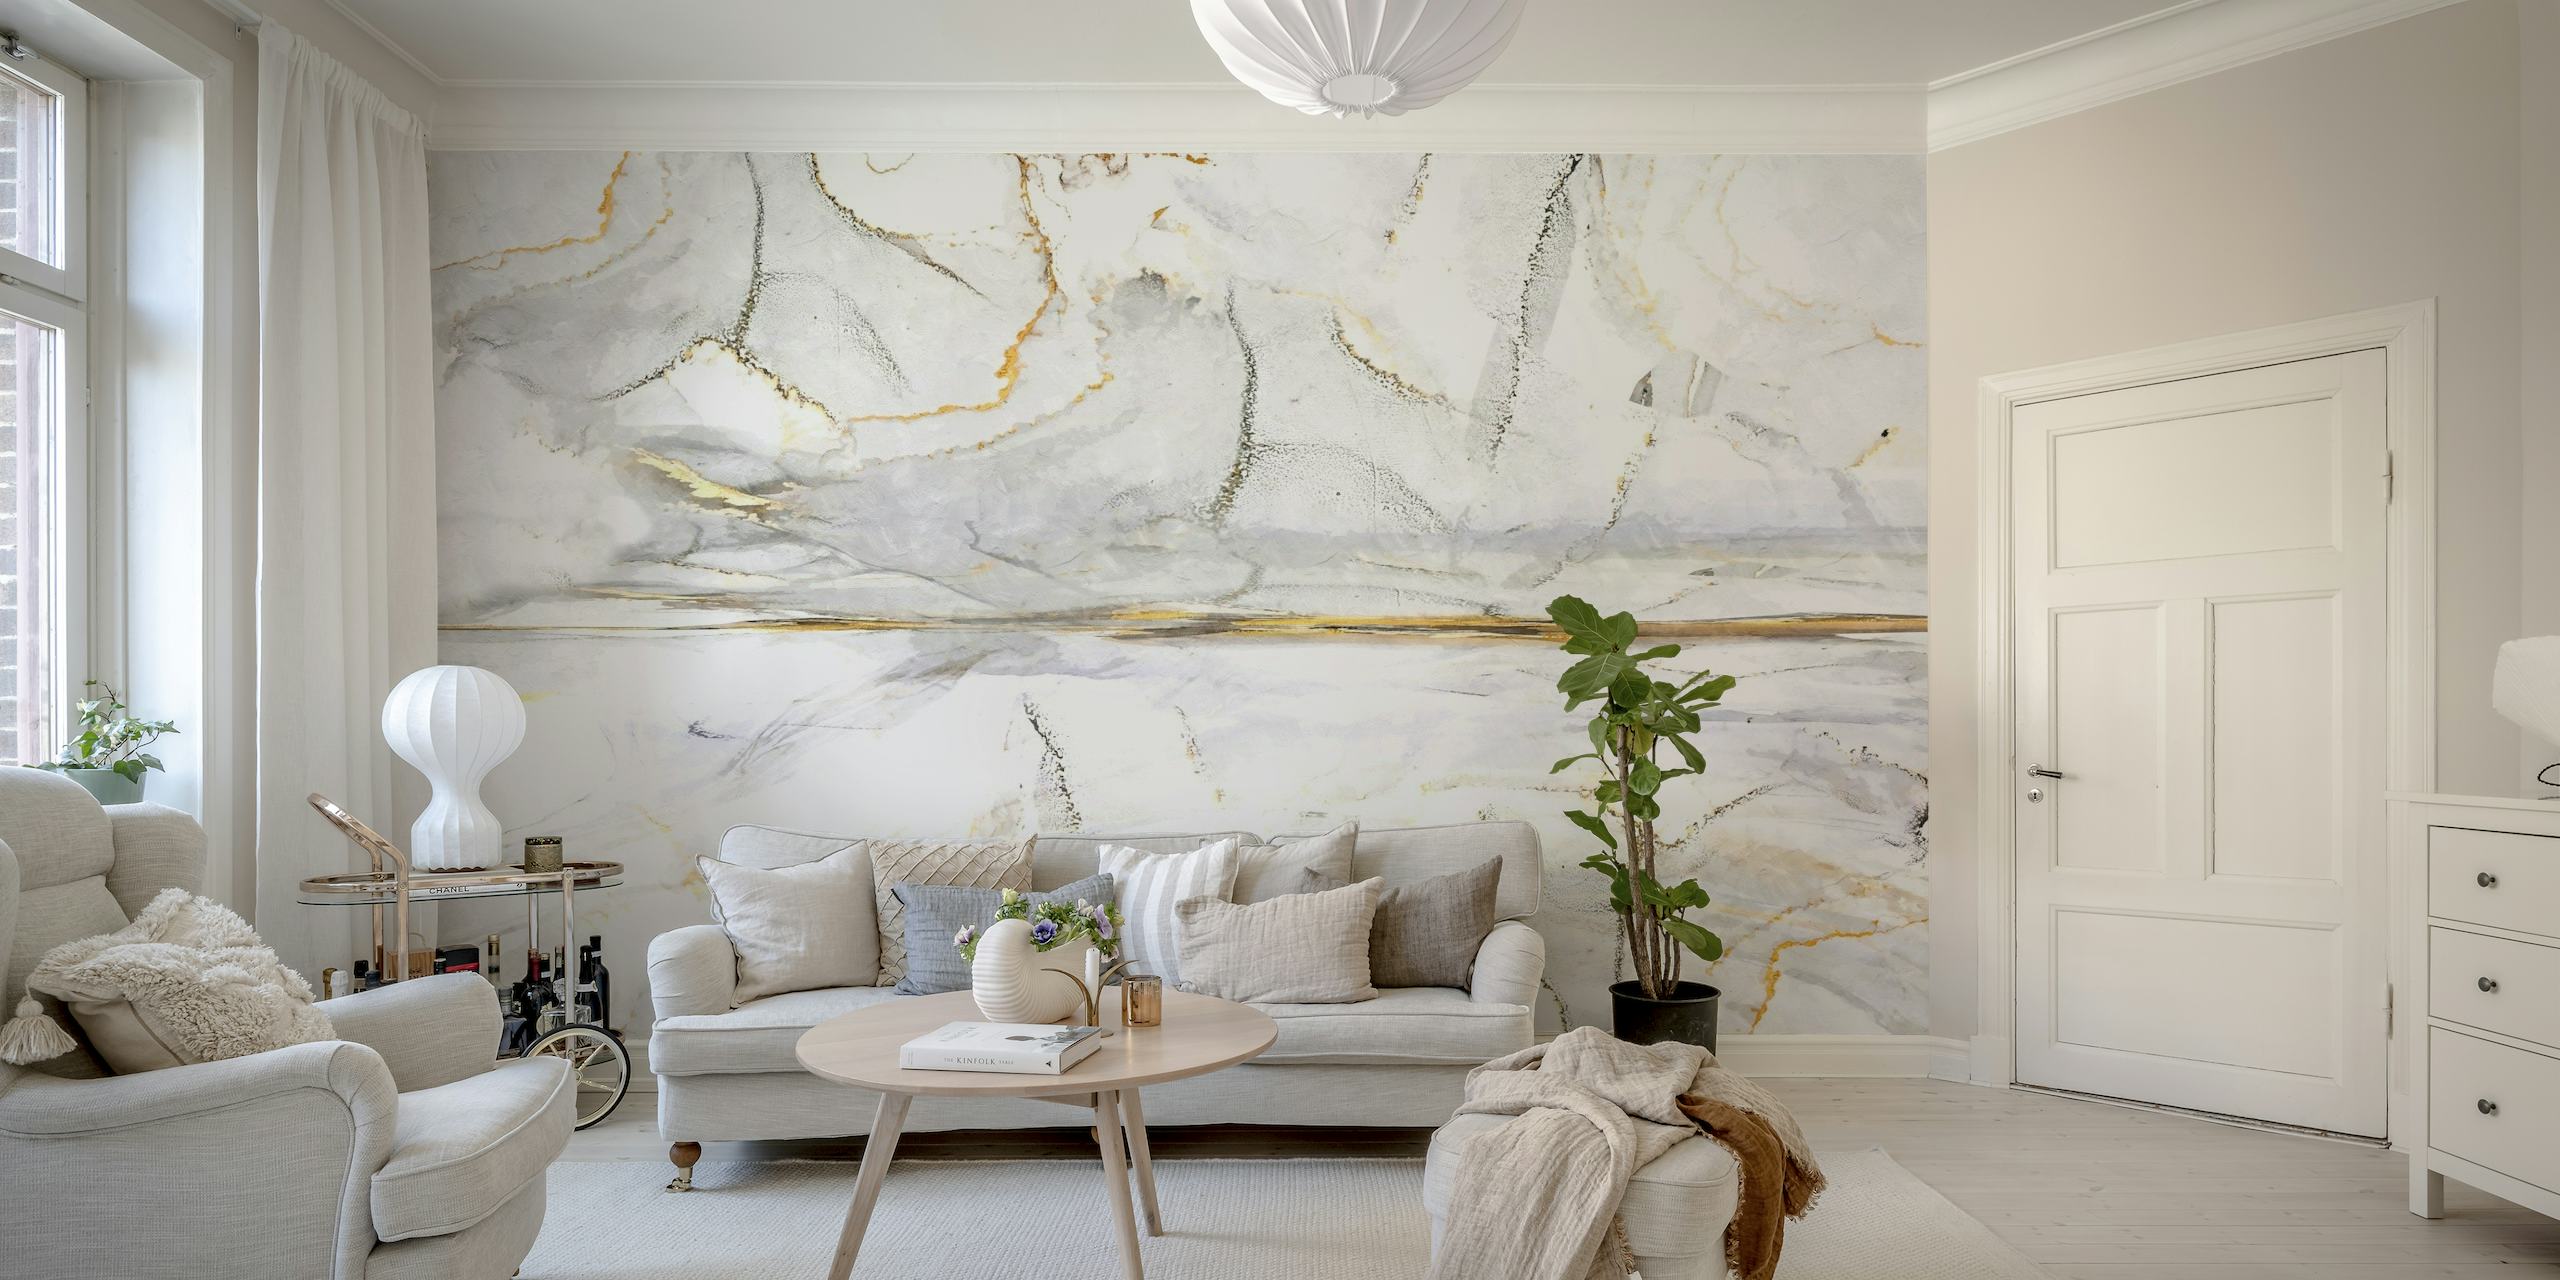 Surface Wall Murals 19 featuring marble texture with white, gray, and gold patterns